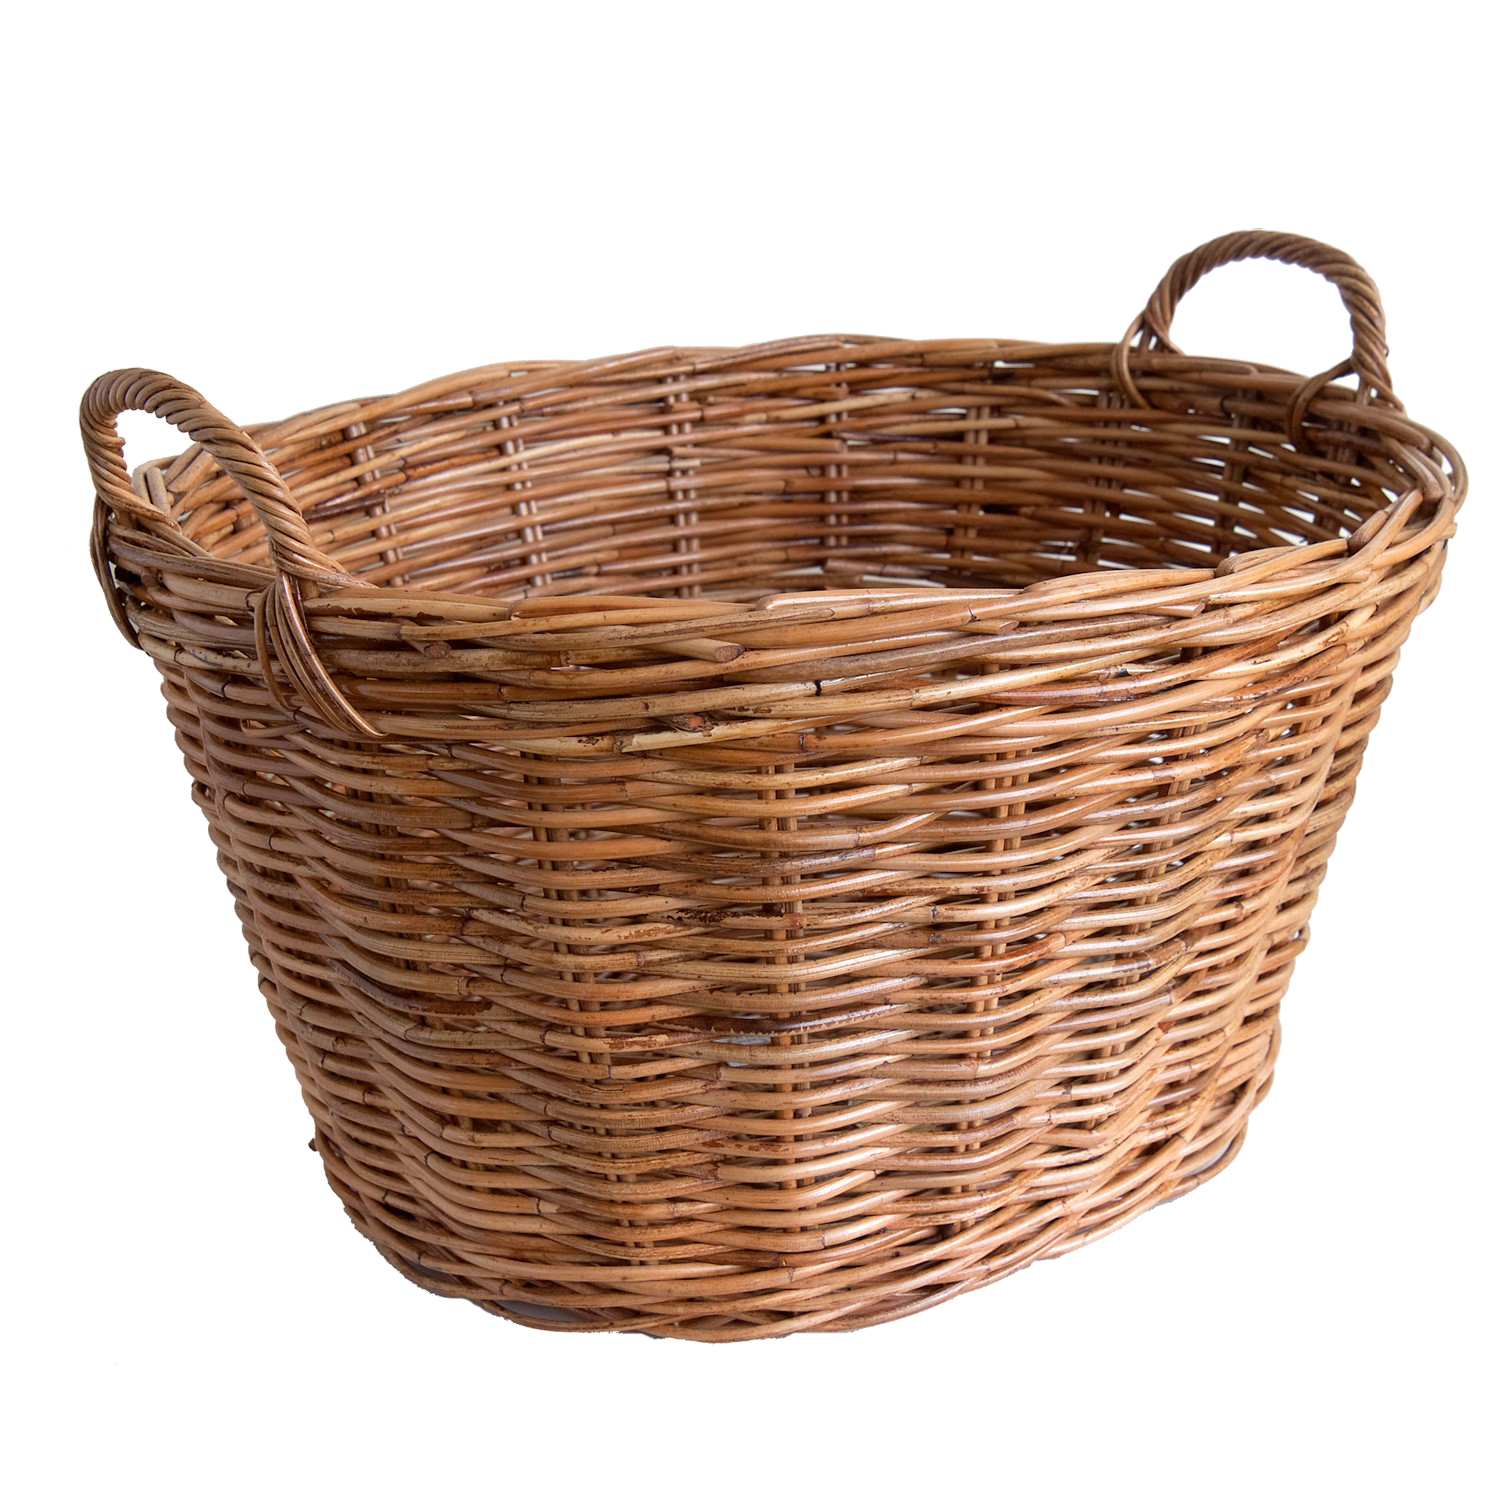 Wicker Image Download HQ PNG PNG Image